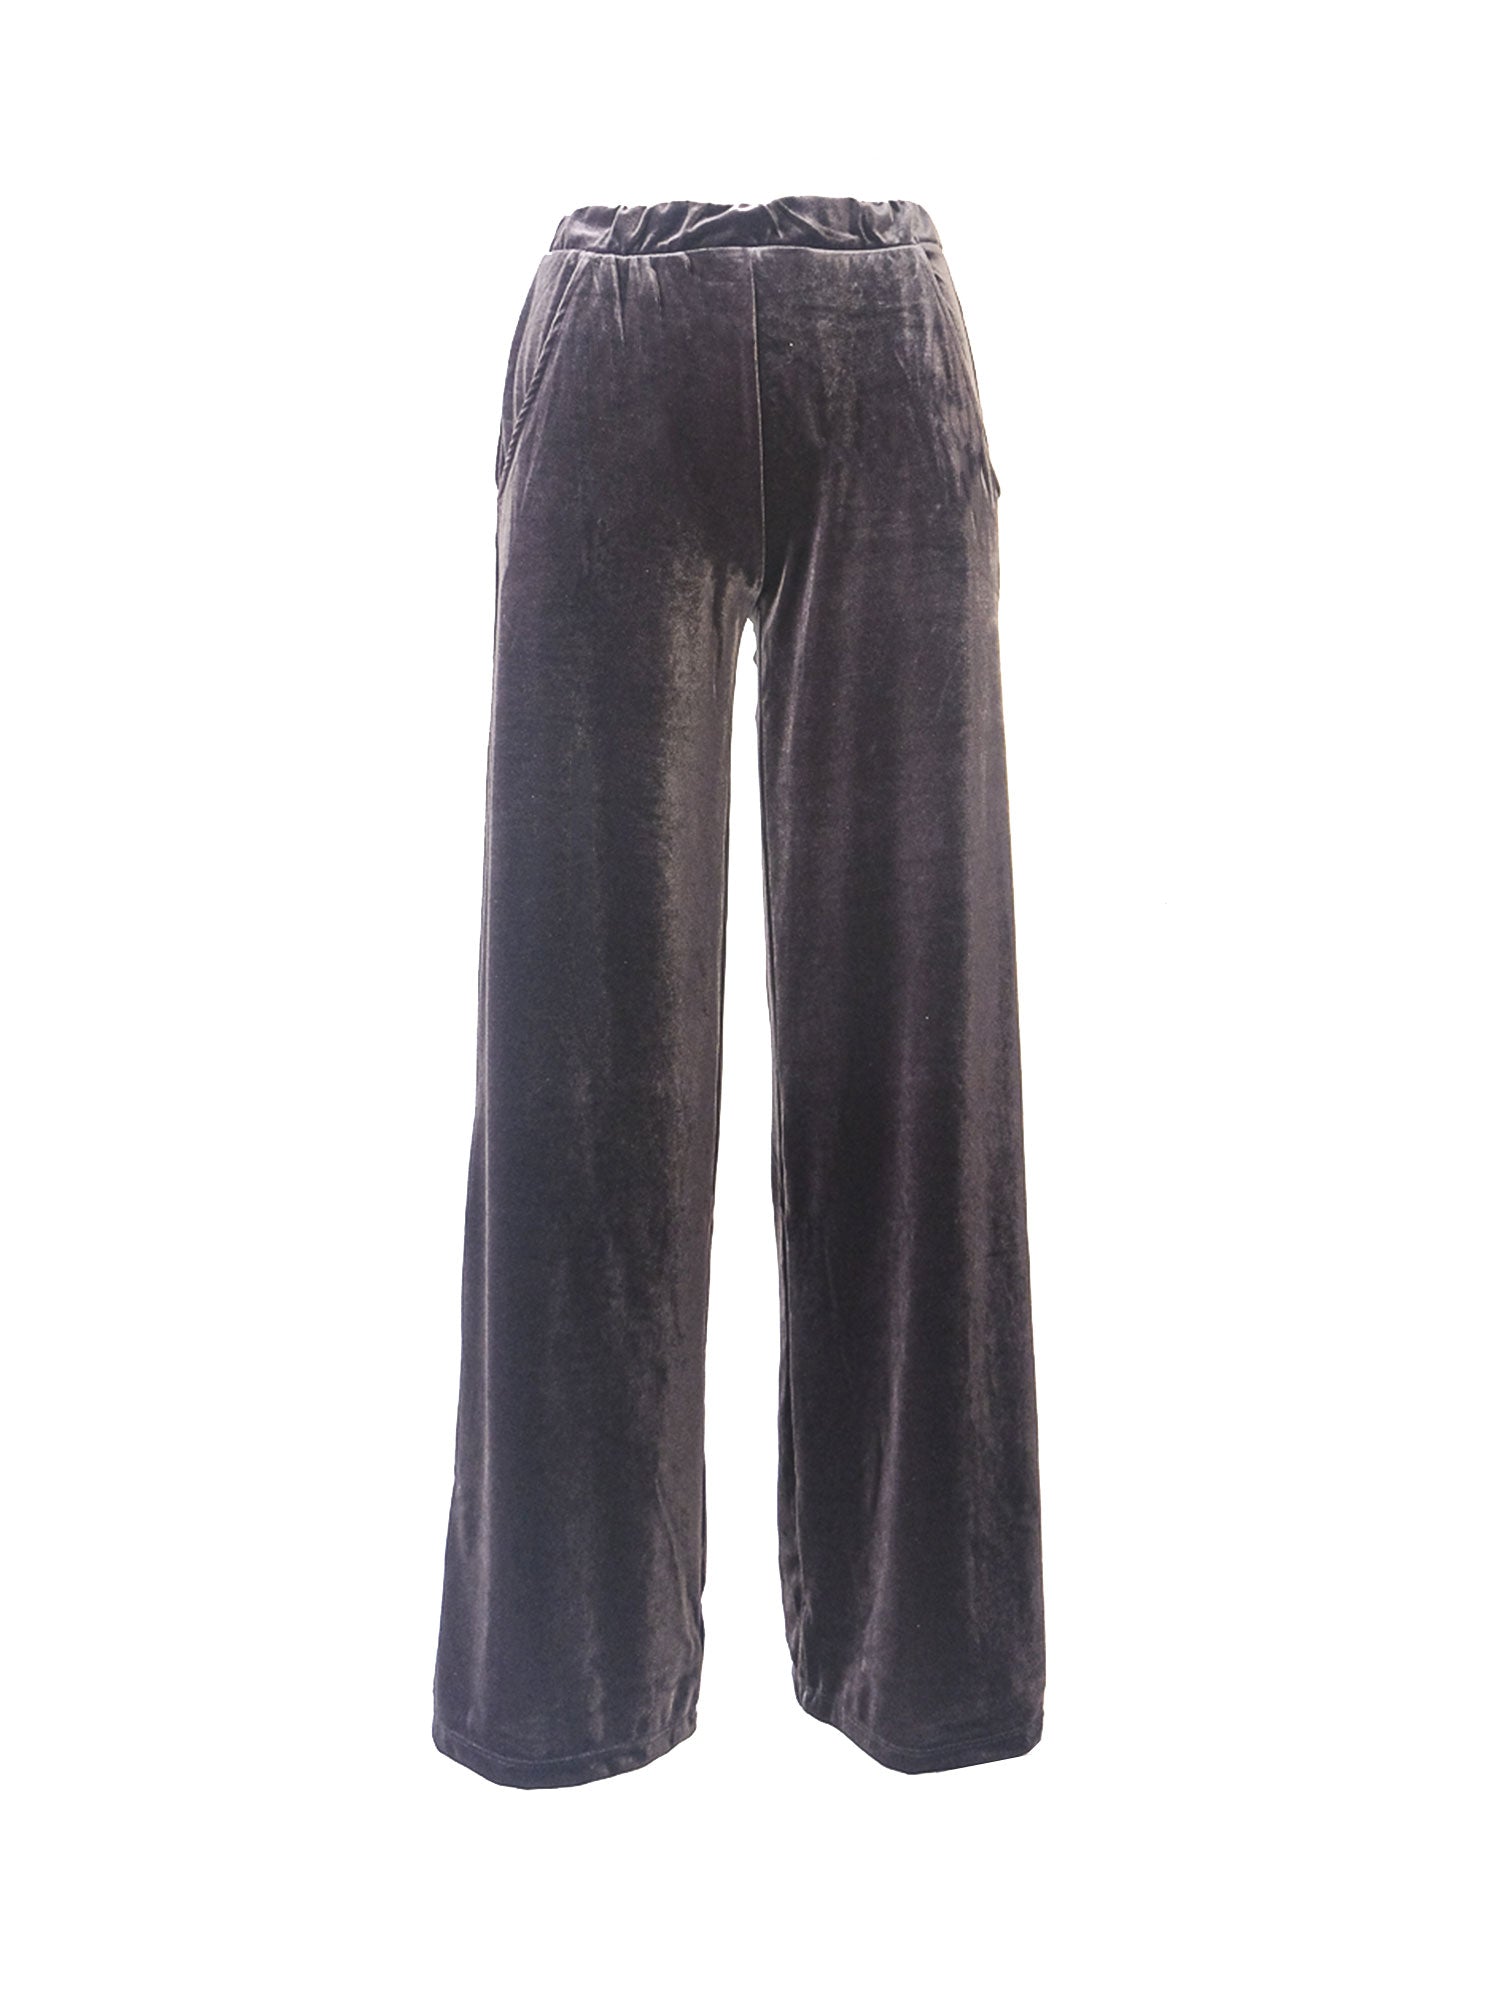 MAXIE - wide-leg chenille trousers in brown